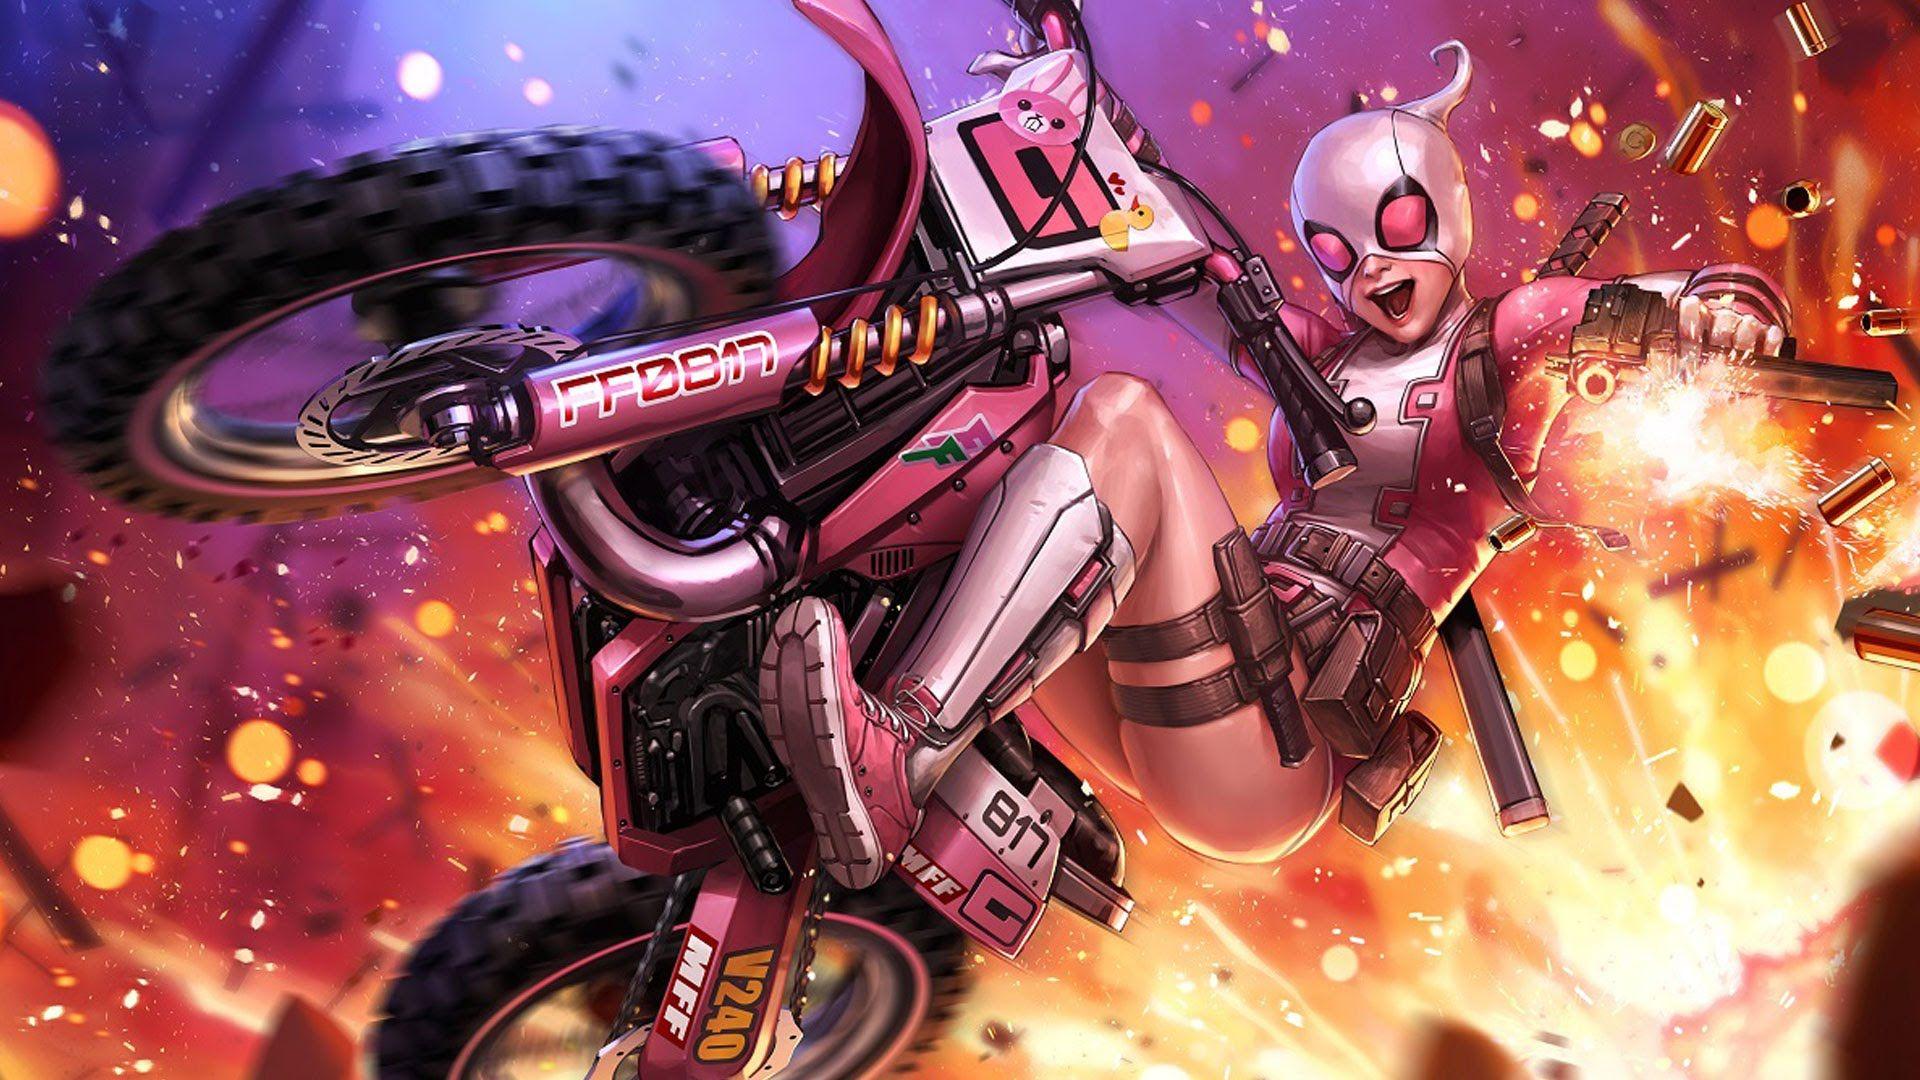 Gwenpool Motorcycle Wallpapers - Wallpaper Cave.